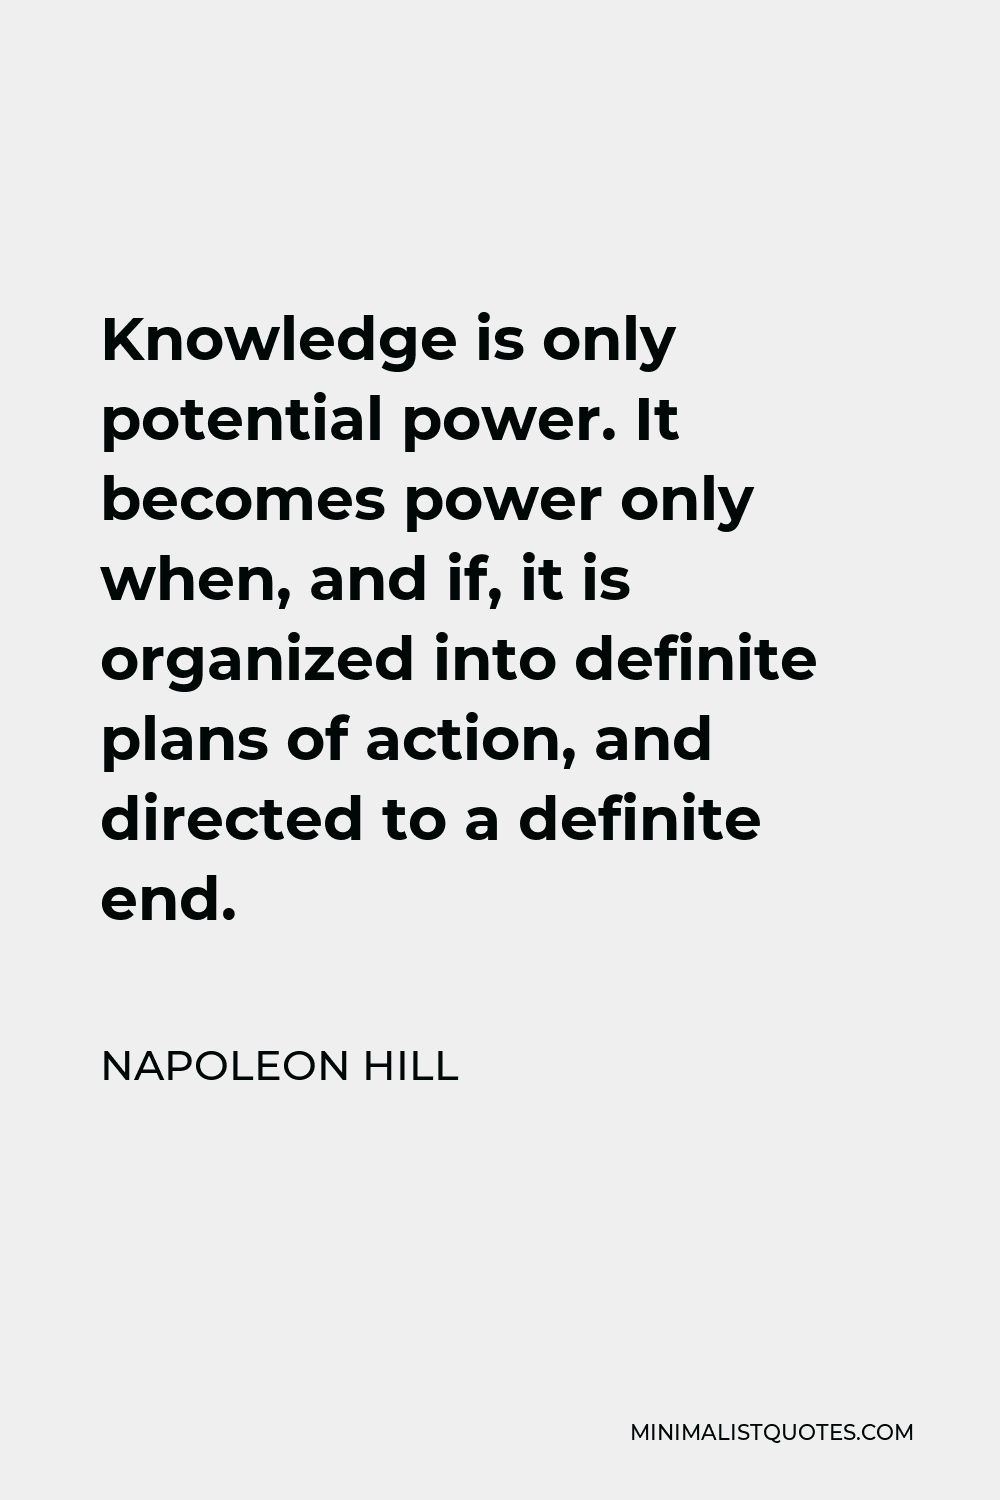 Napoleon Hill Quote - Knowledge is only potential power. It becomes power only when, and if, it is organized into definite plans of action, and directed to a definite end.